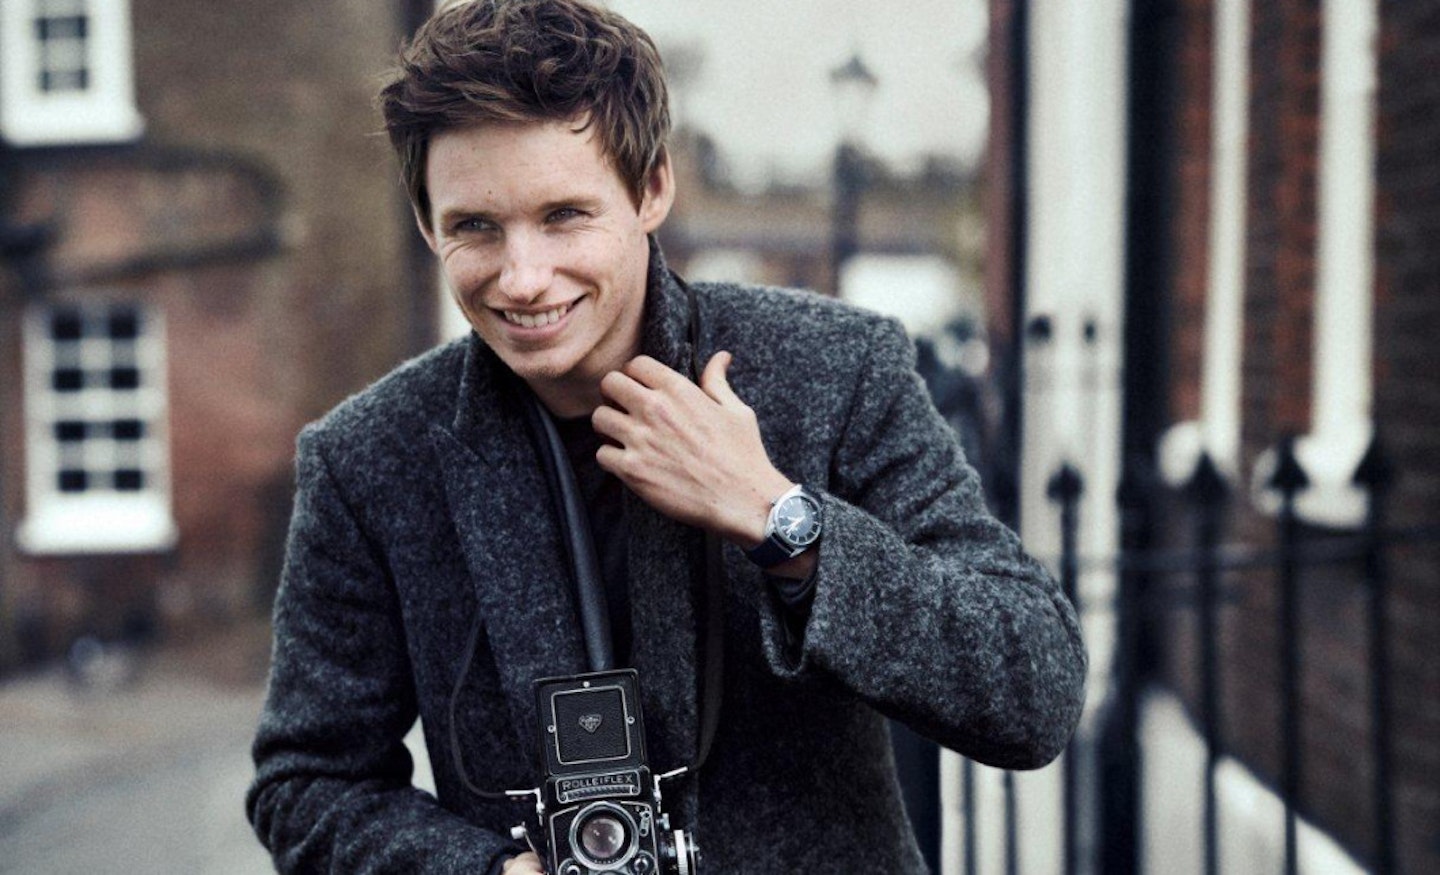 Eddie Redmayne Is The New Face (And Arms) of OMEGA Watches